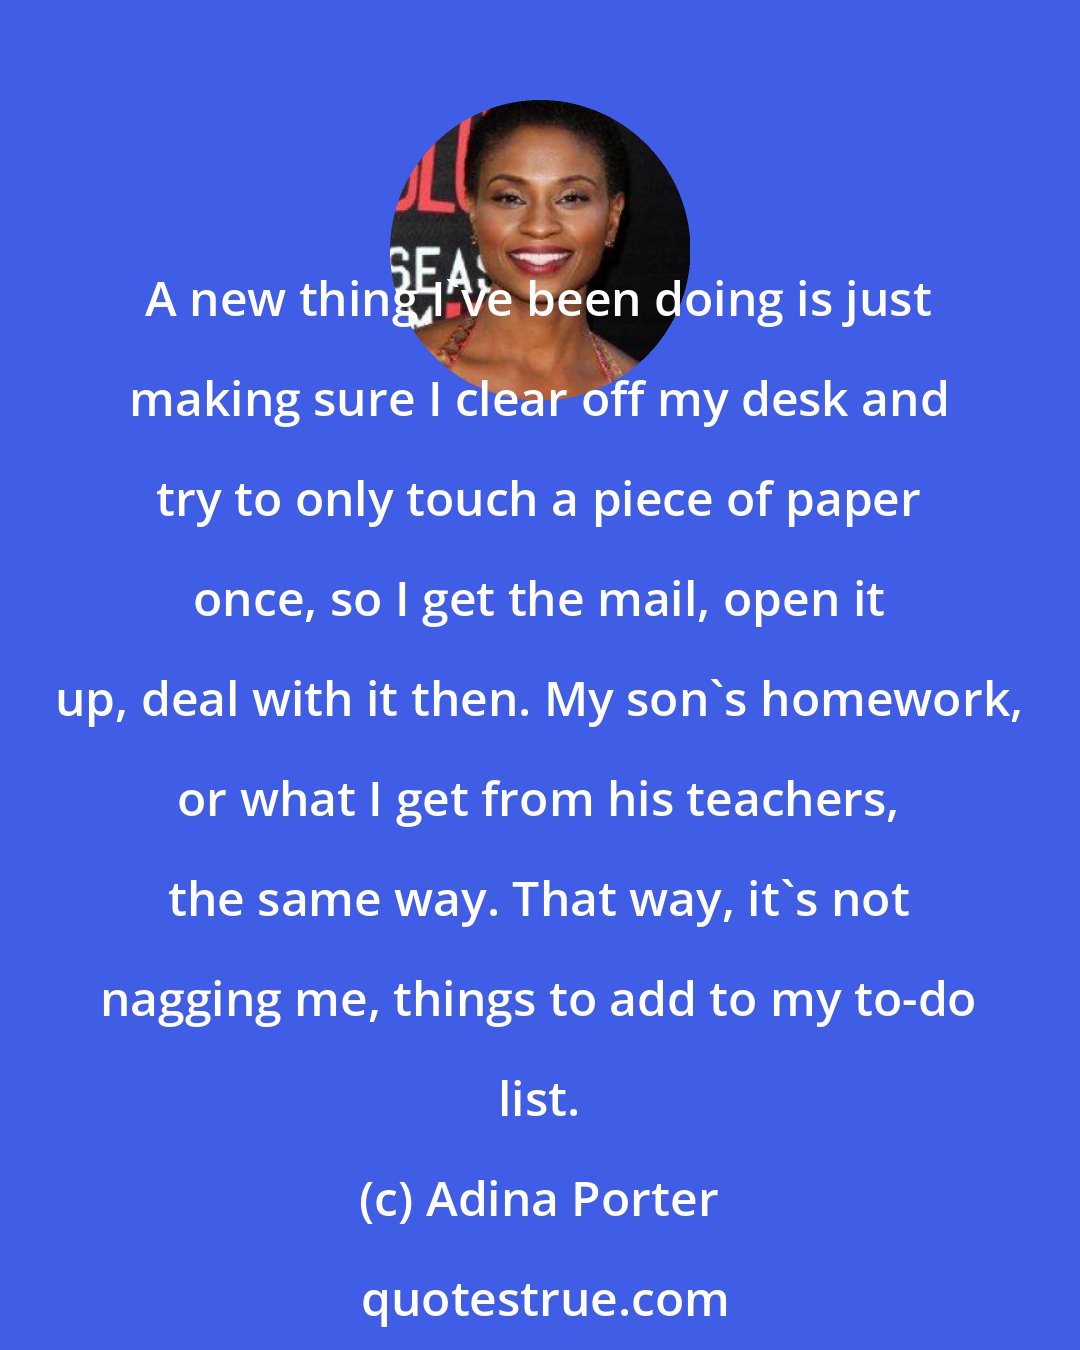 Adina Porter: A new thing I've been doing is just making sure I clear off my desk and try to only touch a piece of paper once, so I get the mail, open it up, deal with it then. My son's homework, or what I get from his teachers, the same way. That way, it's not nagging me, things to add to my to-do list.